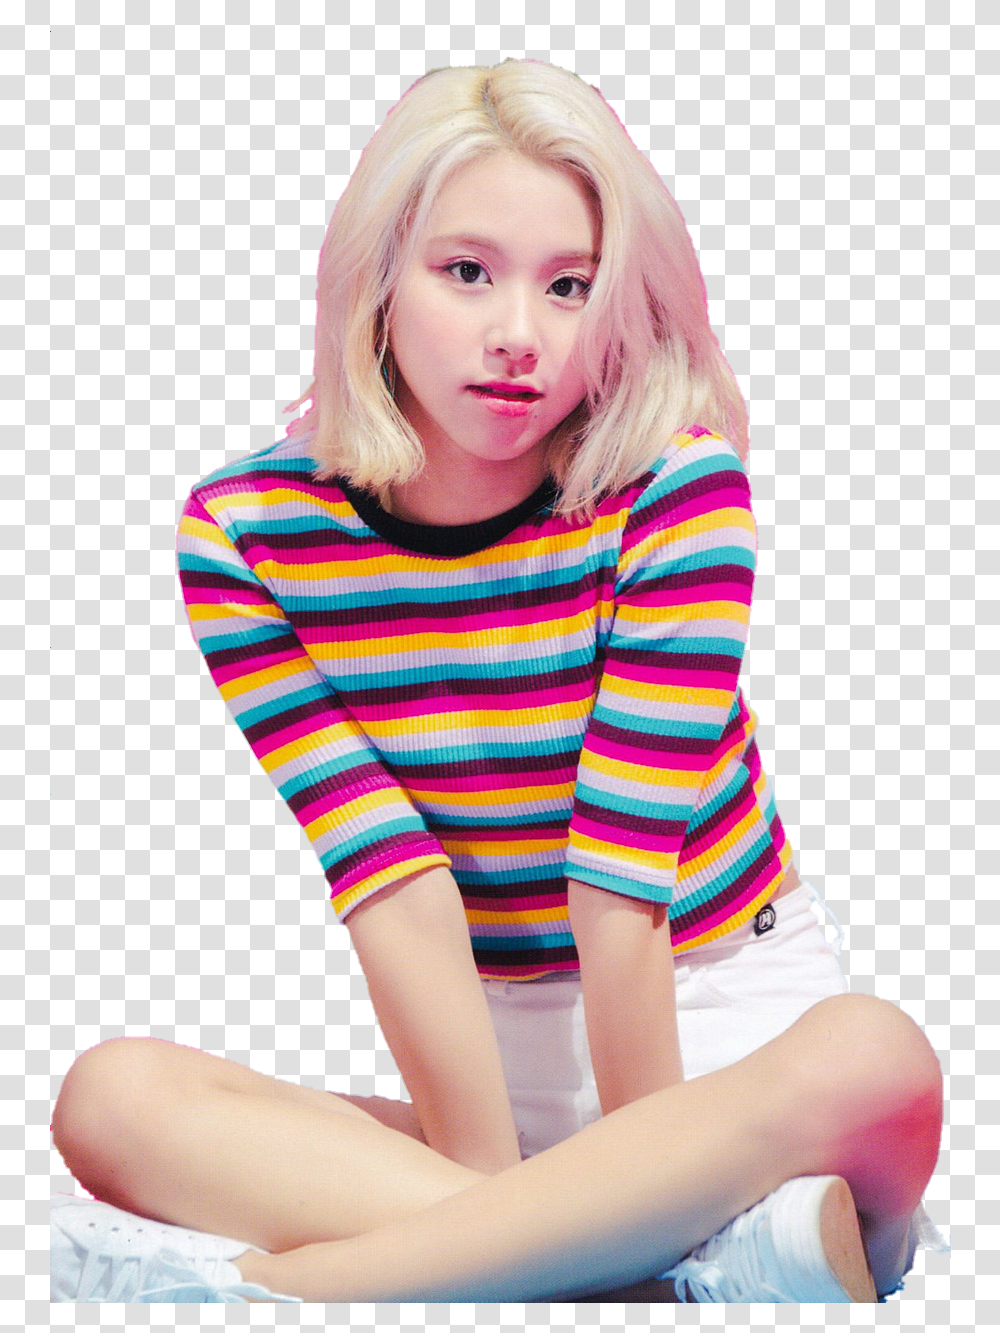 Chaeyoung Twice Sticker By Sitting, Blonde, Woman, Girl, Kid Transparent Png